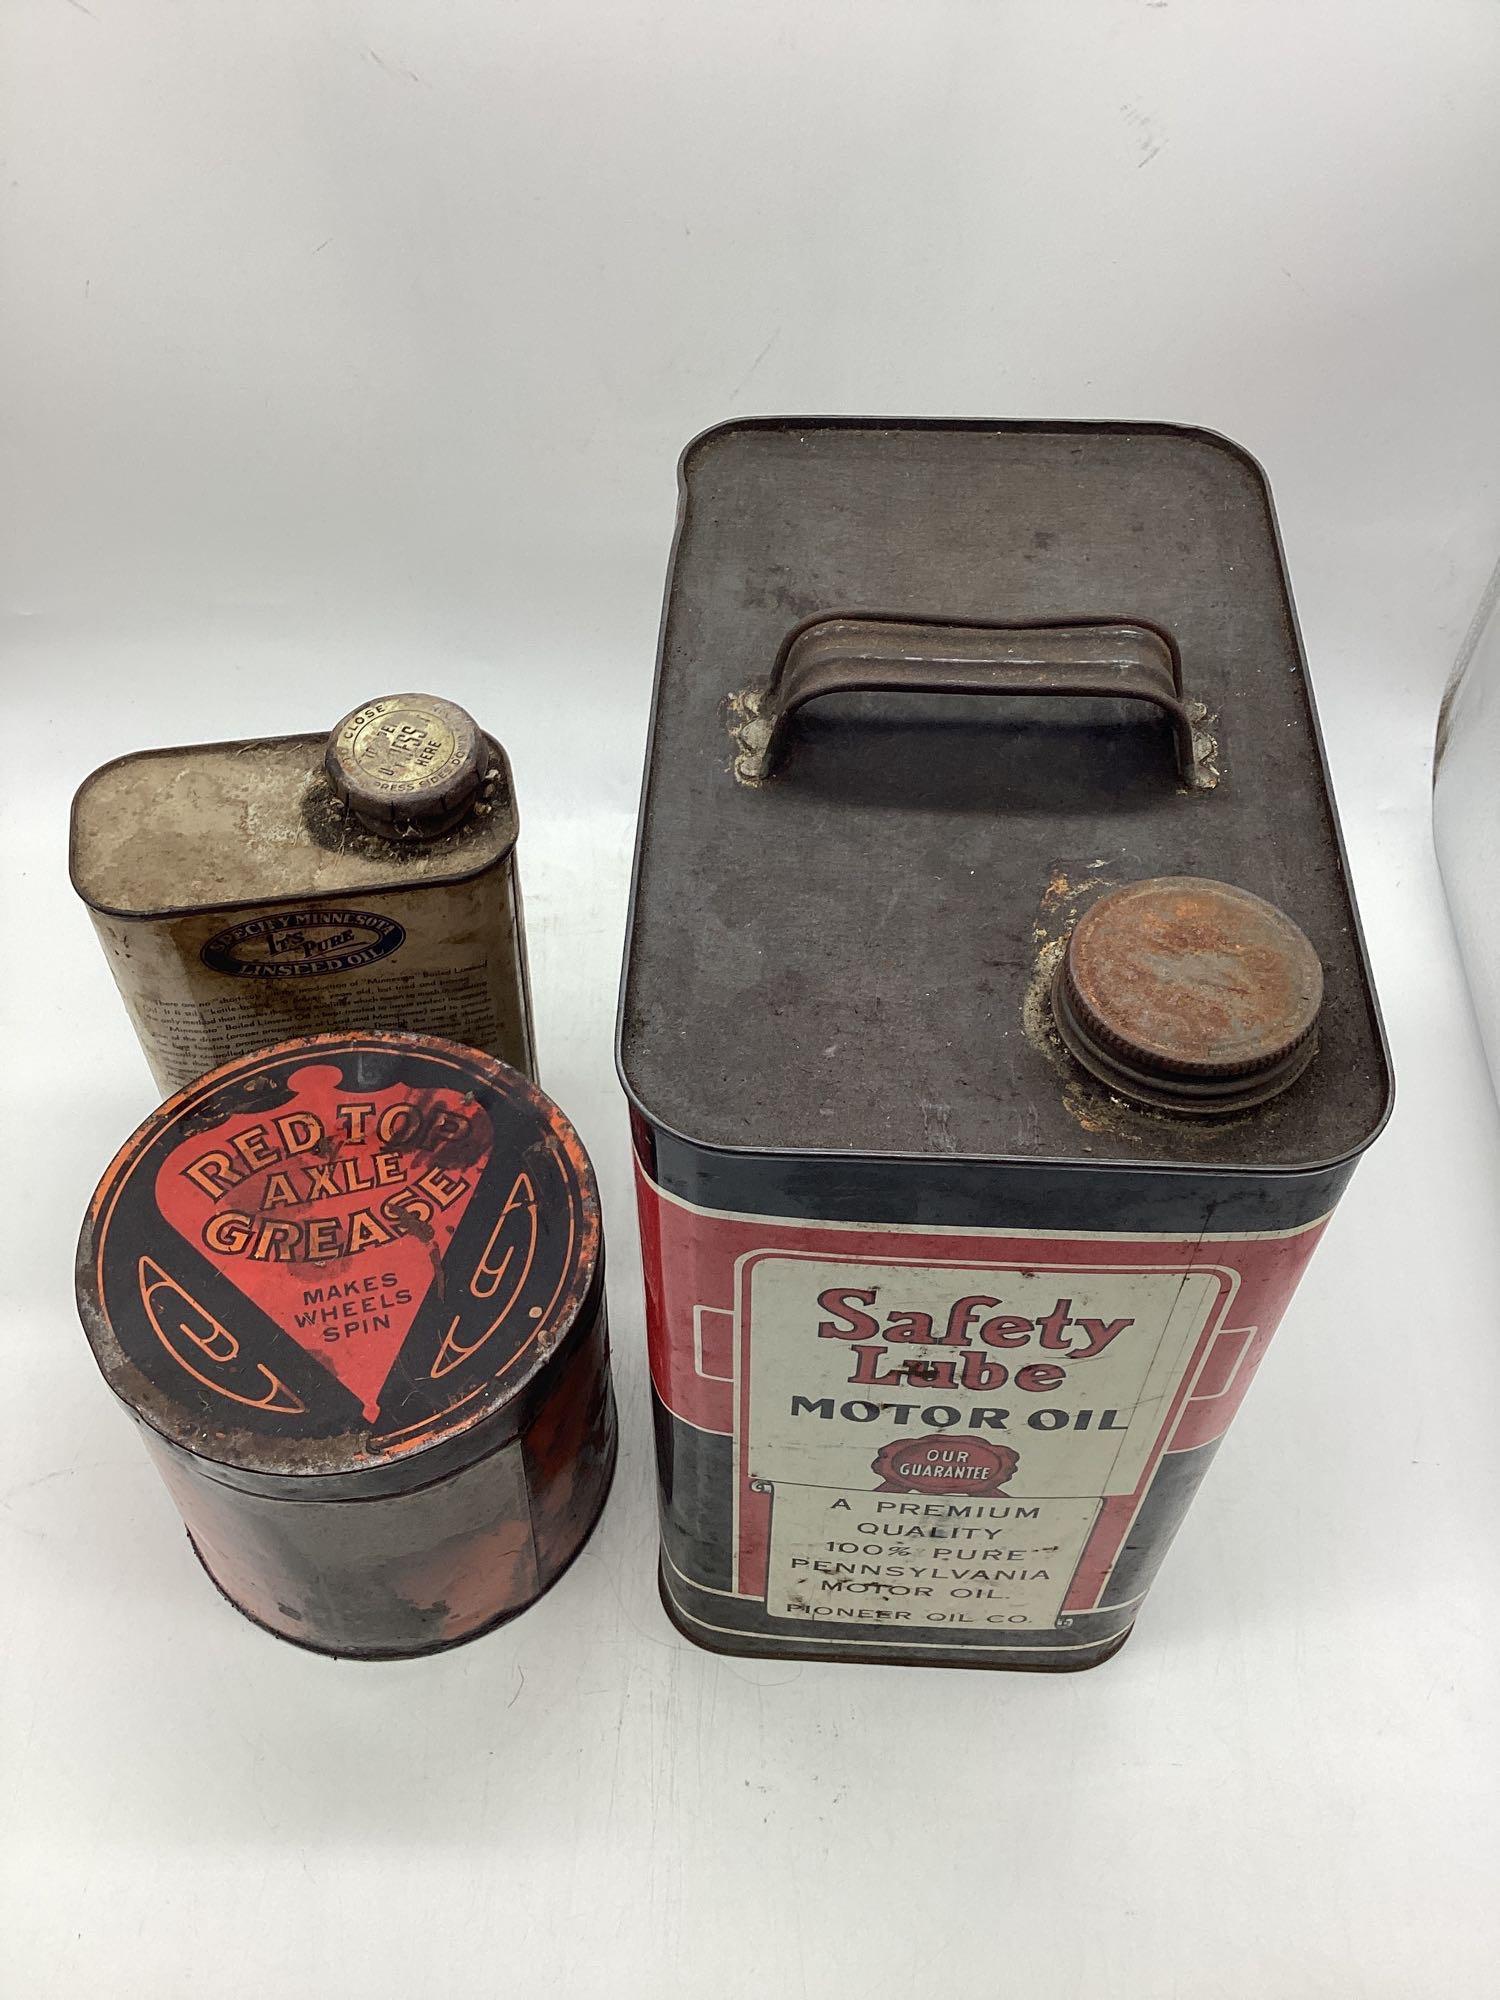 Safety-Lube 2 Gallon and Quart Minnesota Linseed Oil Cans